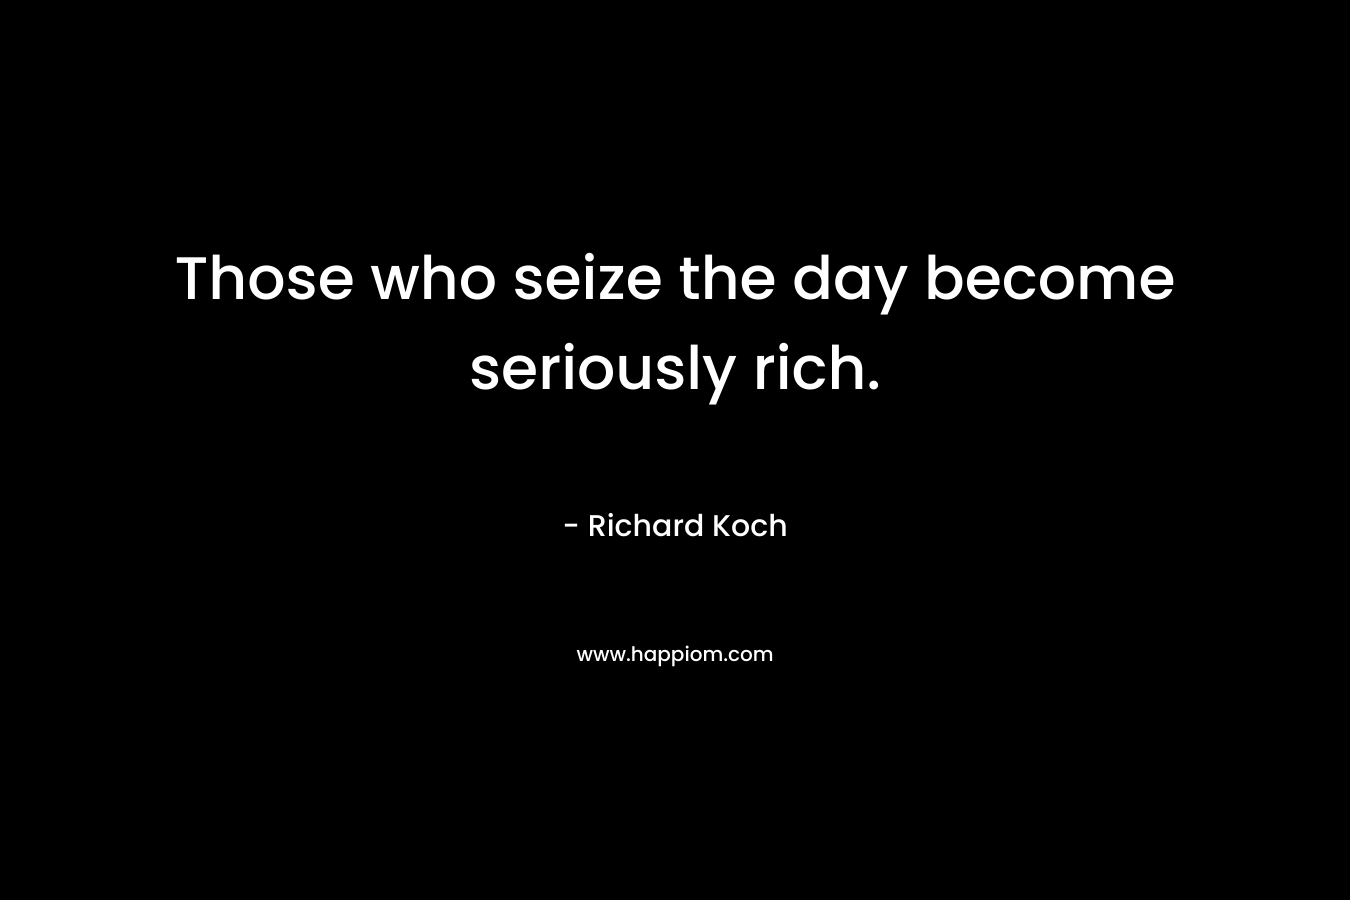 Those who seize the day become seriously rich.